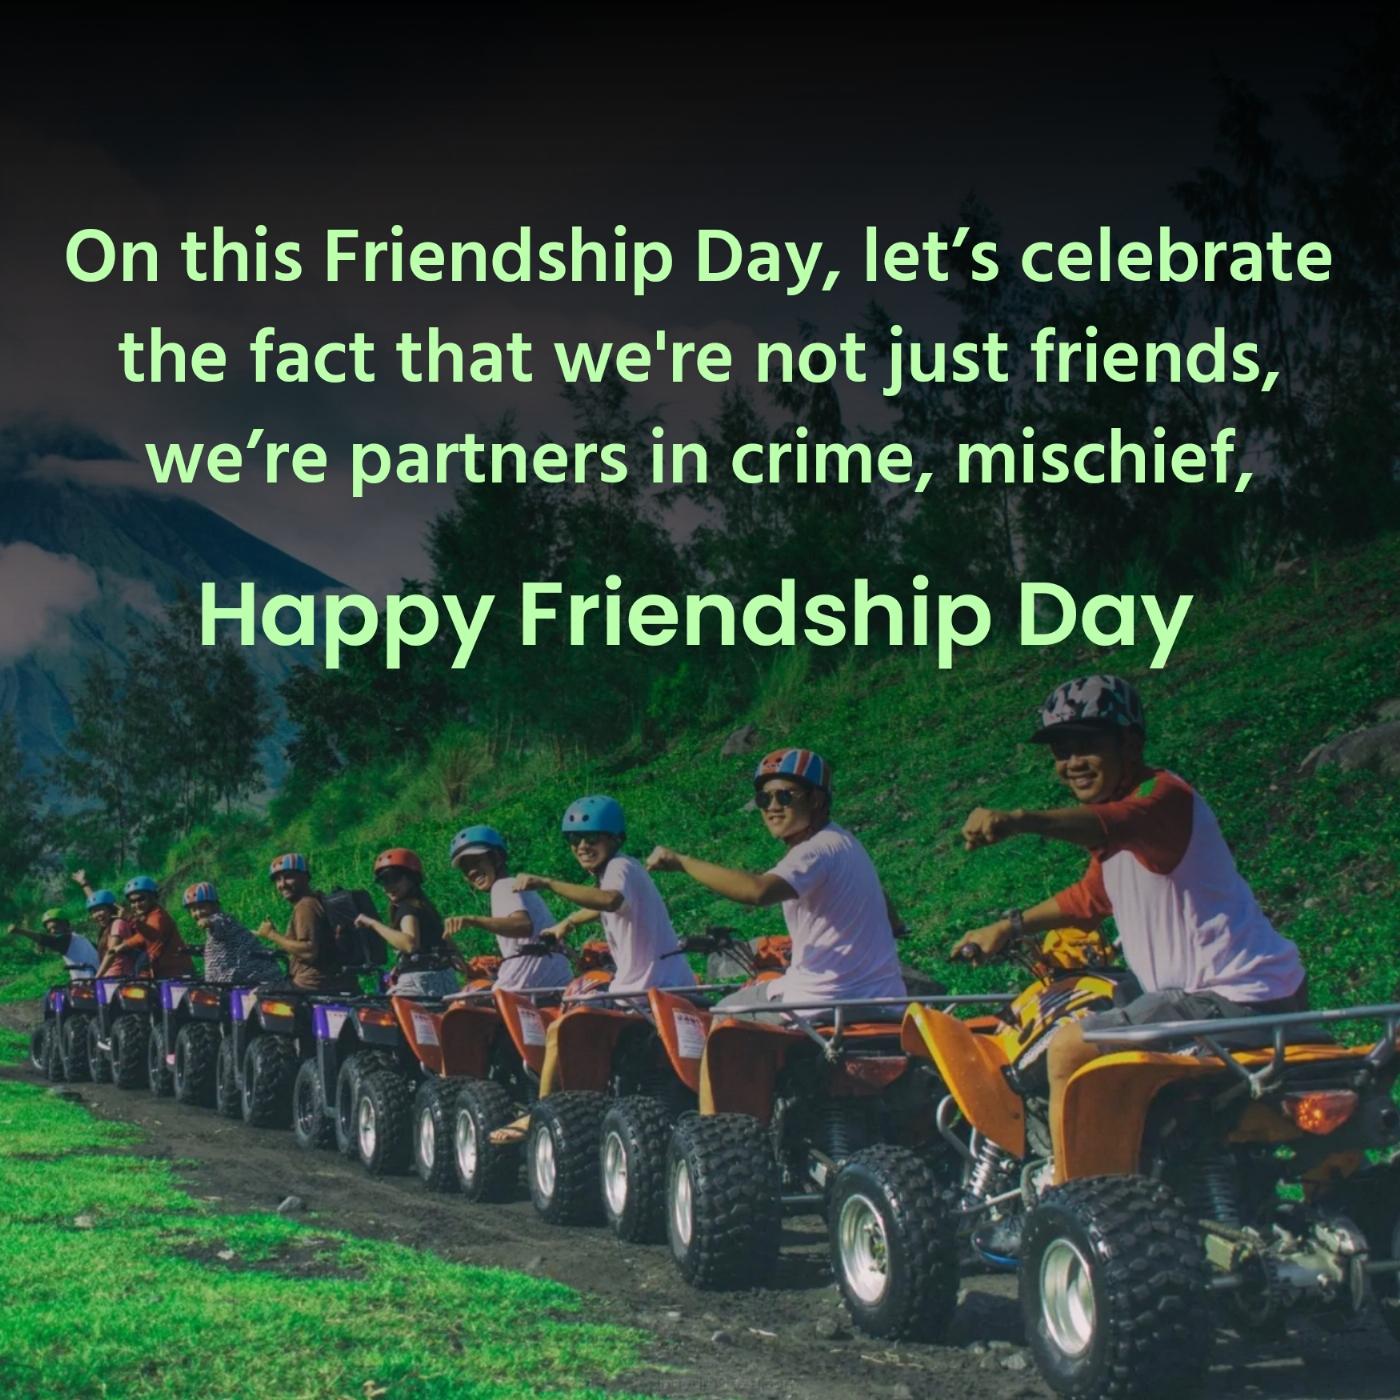 On this Friendship Day lets celebrate the fact that we're not just friends